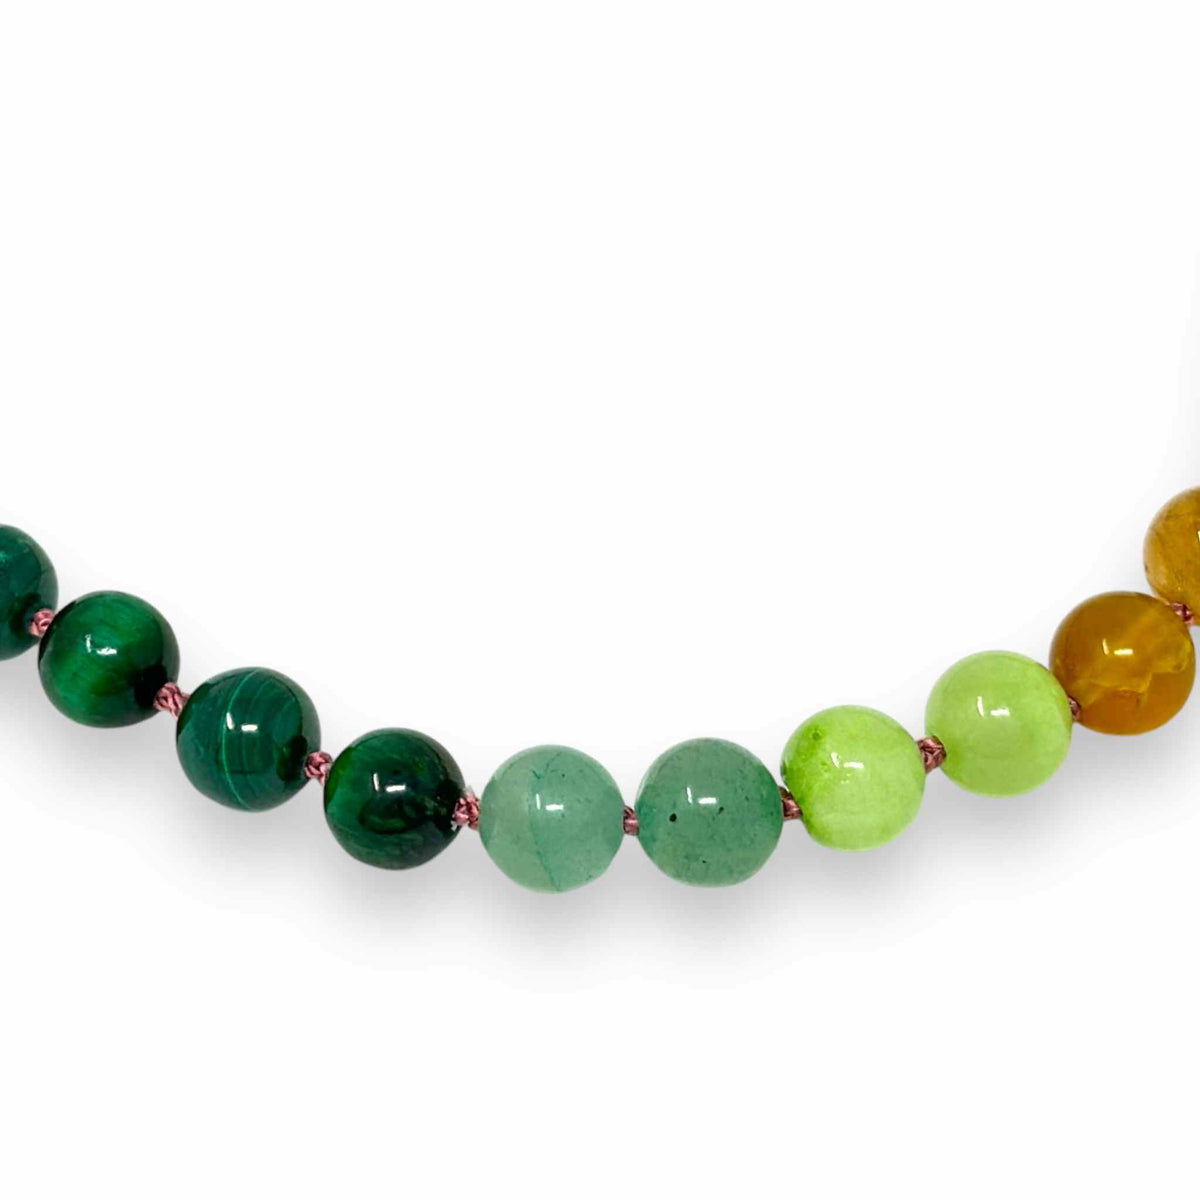 Multicoloured gemstone beaded necklace on white backdrop zoom in